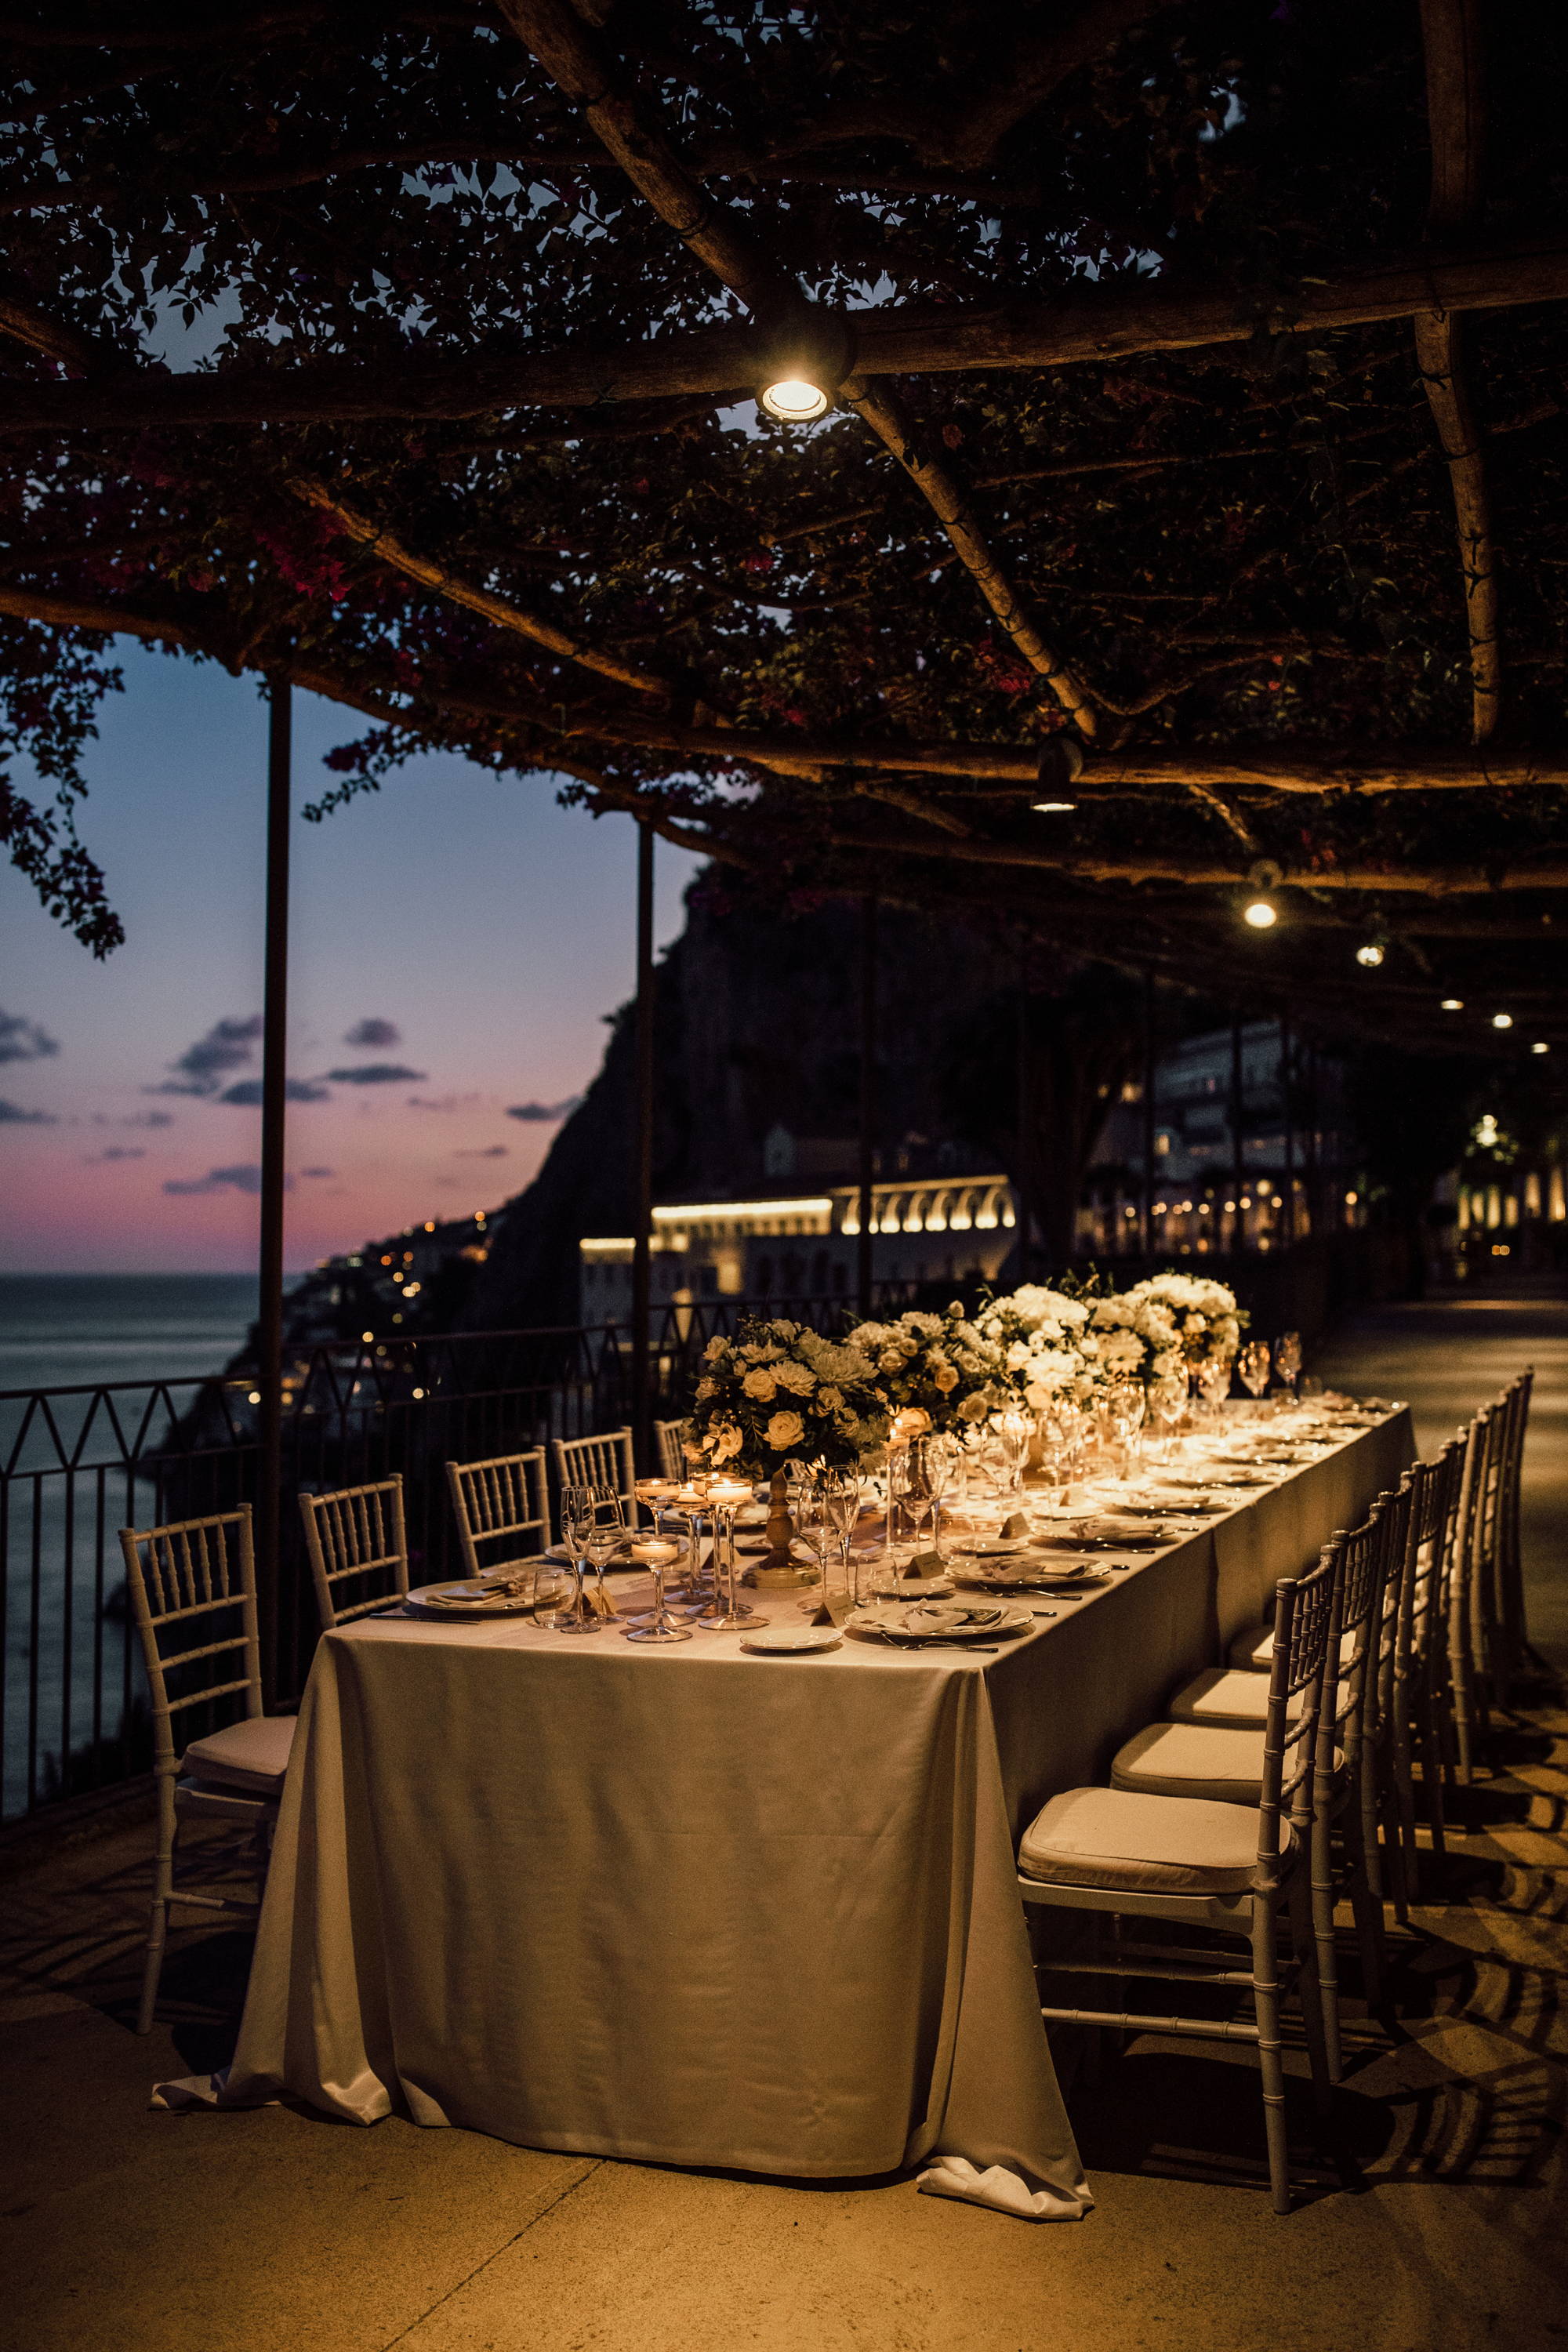 An intimate low light wedding reception dinner at sunset in Italy